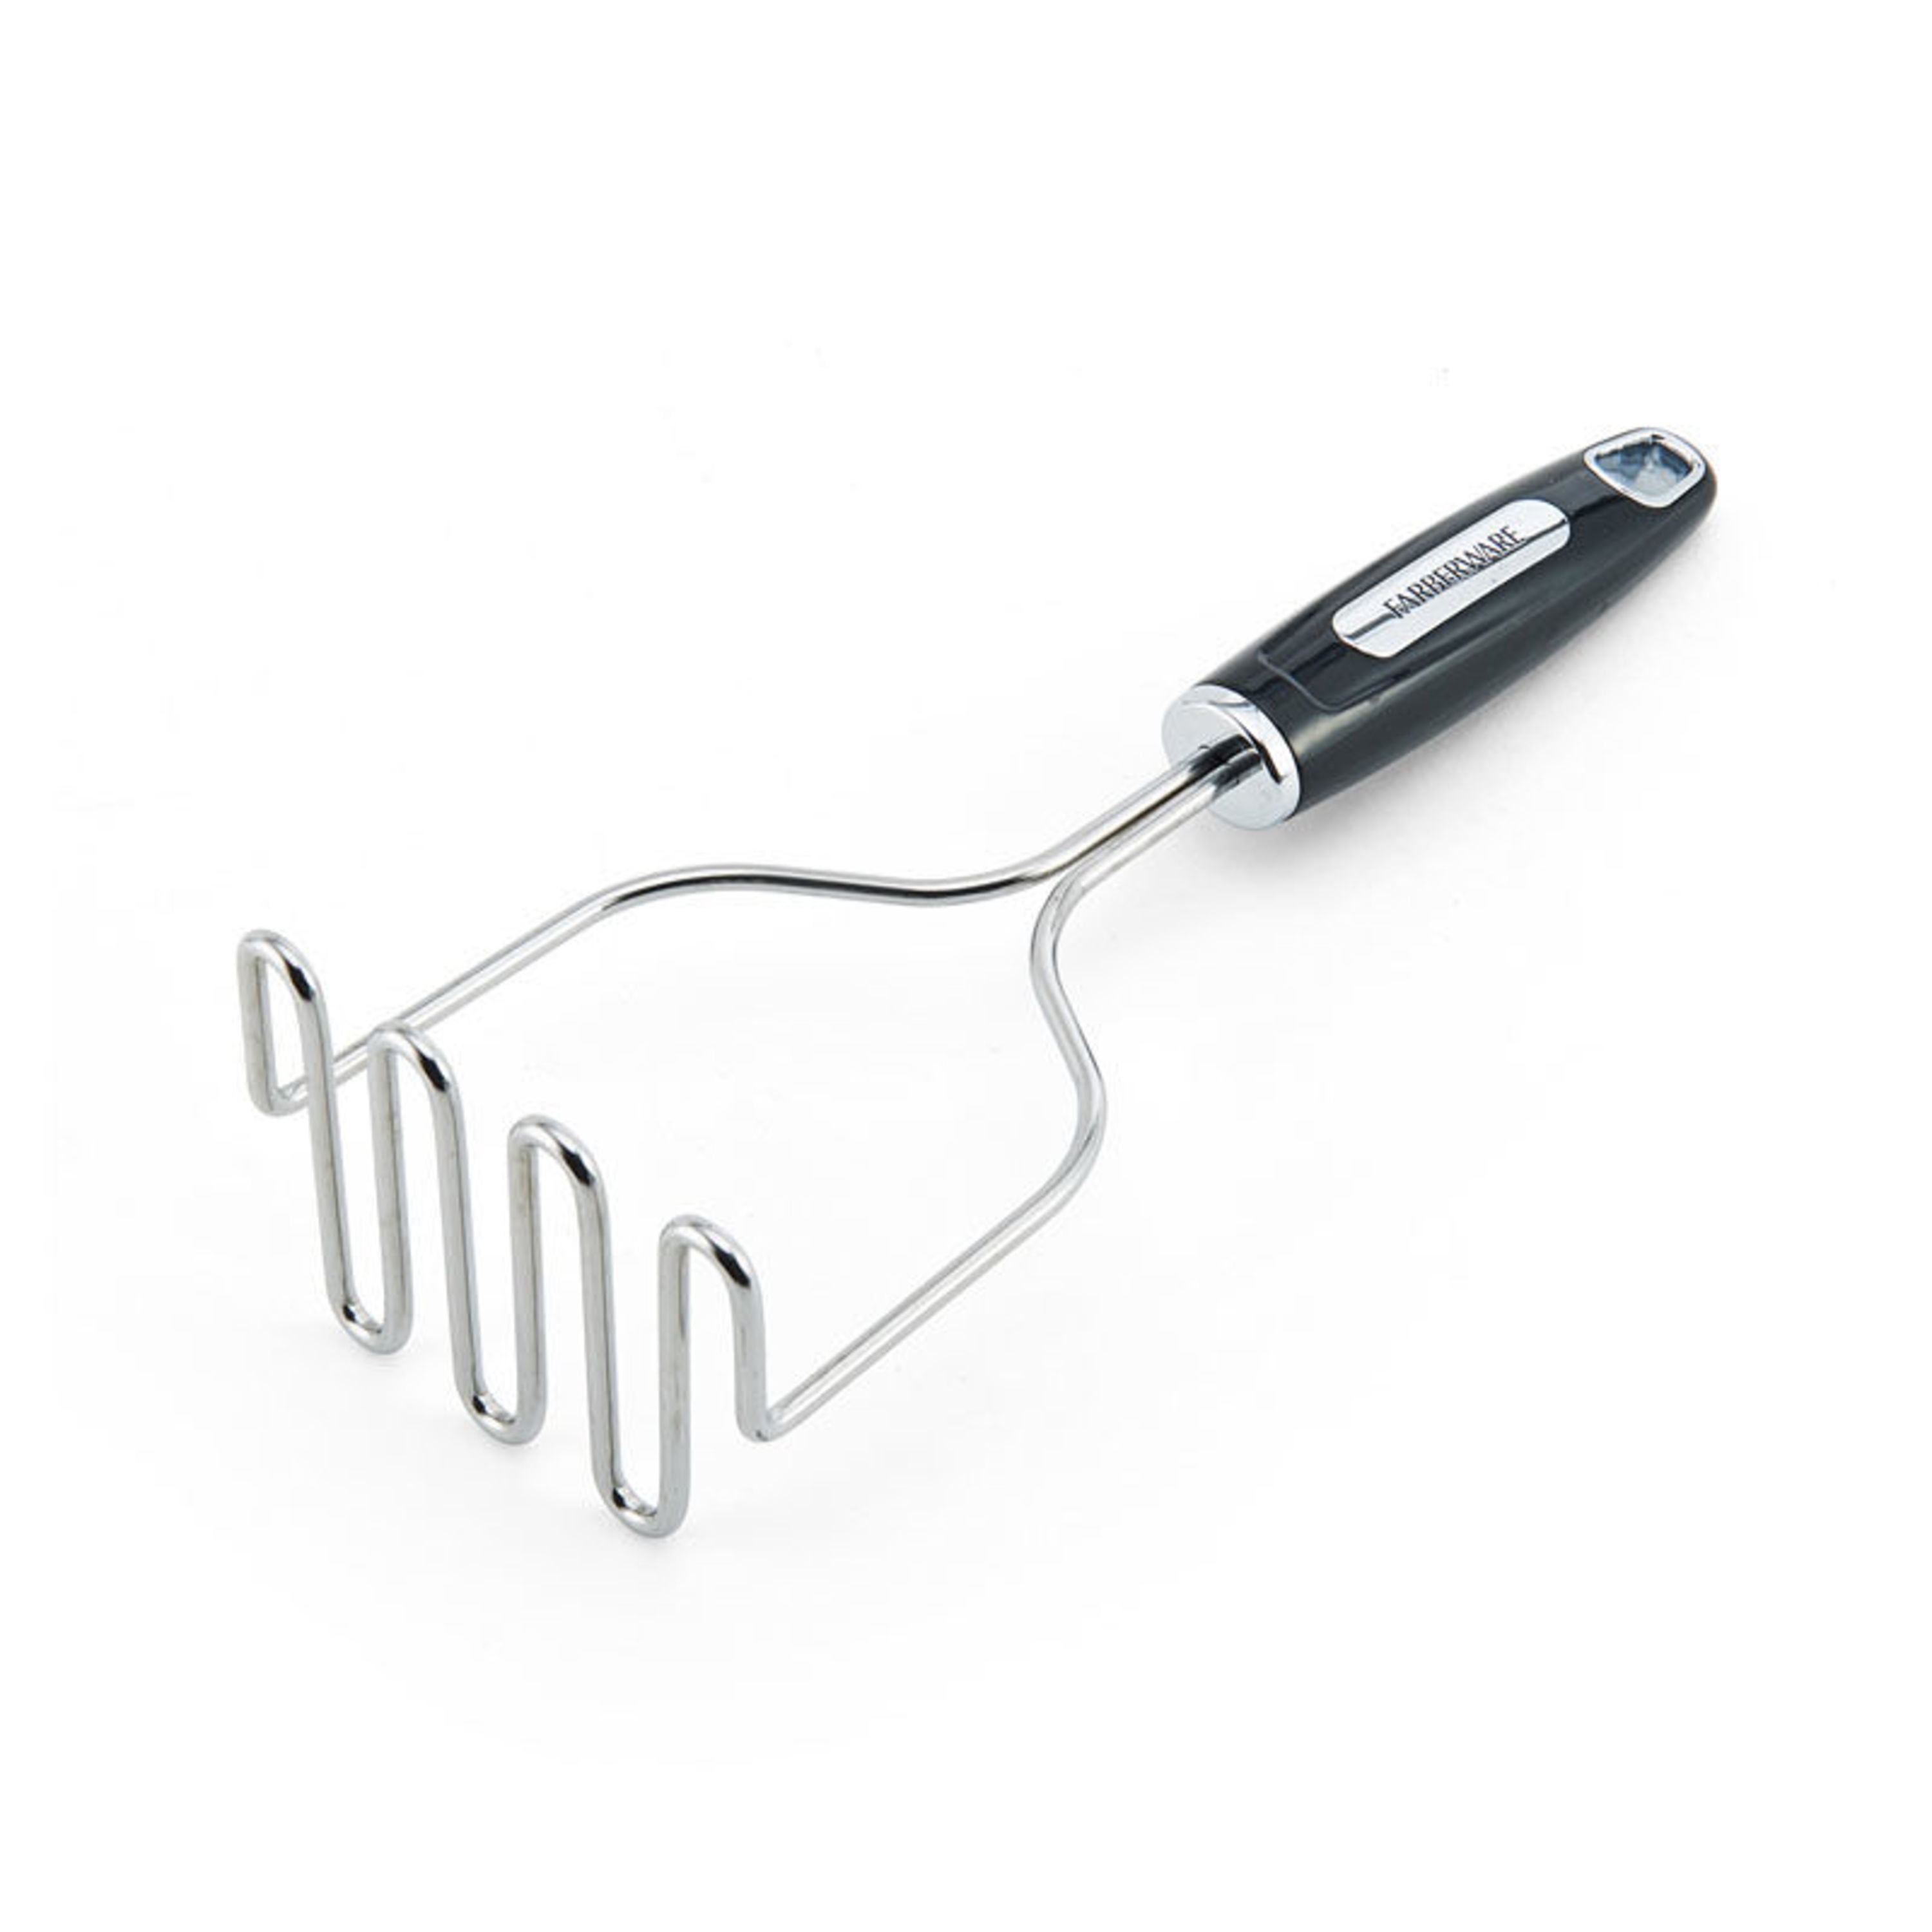 Cook With Color Hand Held Potato Masher - Professional Wire Stainless Steel  with Long Comfort Handles Food Masher - Perfect for Potatoes, Beans